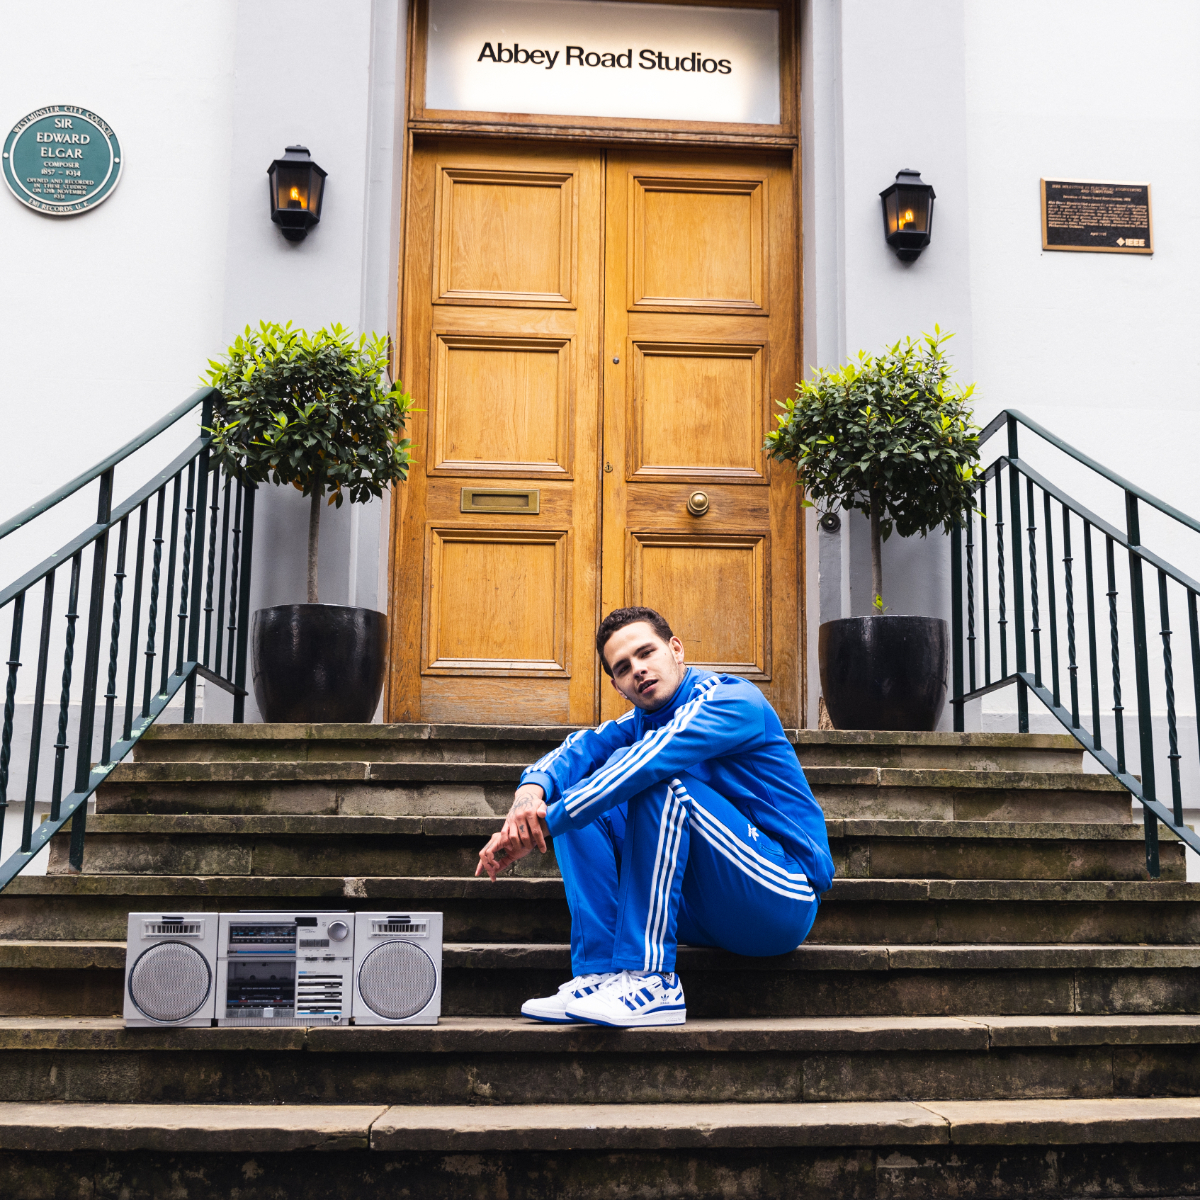 Adidas Enlist Slowthai, Beabadoobee and Berwyn to Help Undiscovered Artists with Abbey Road Studios